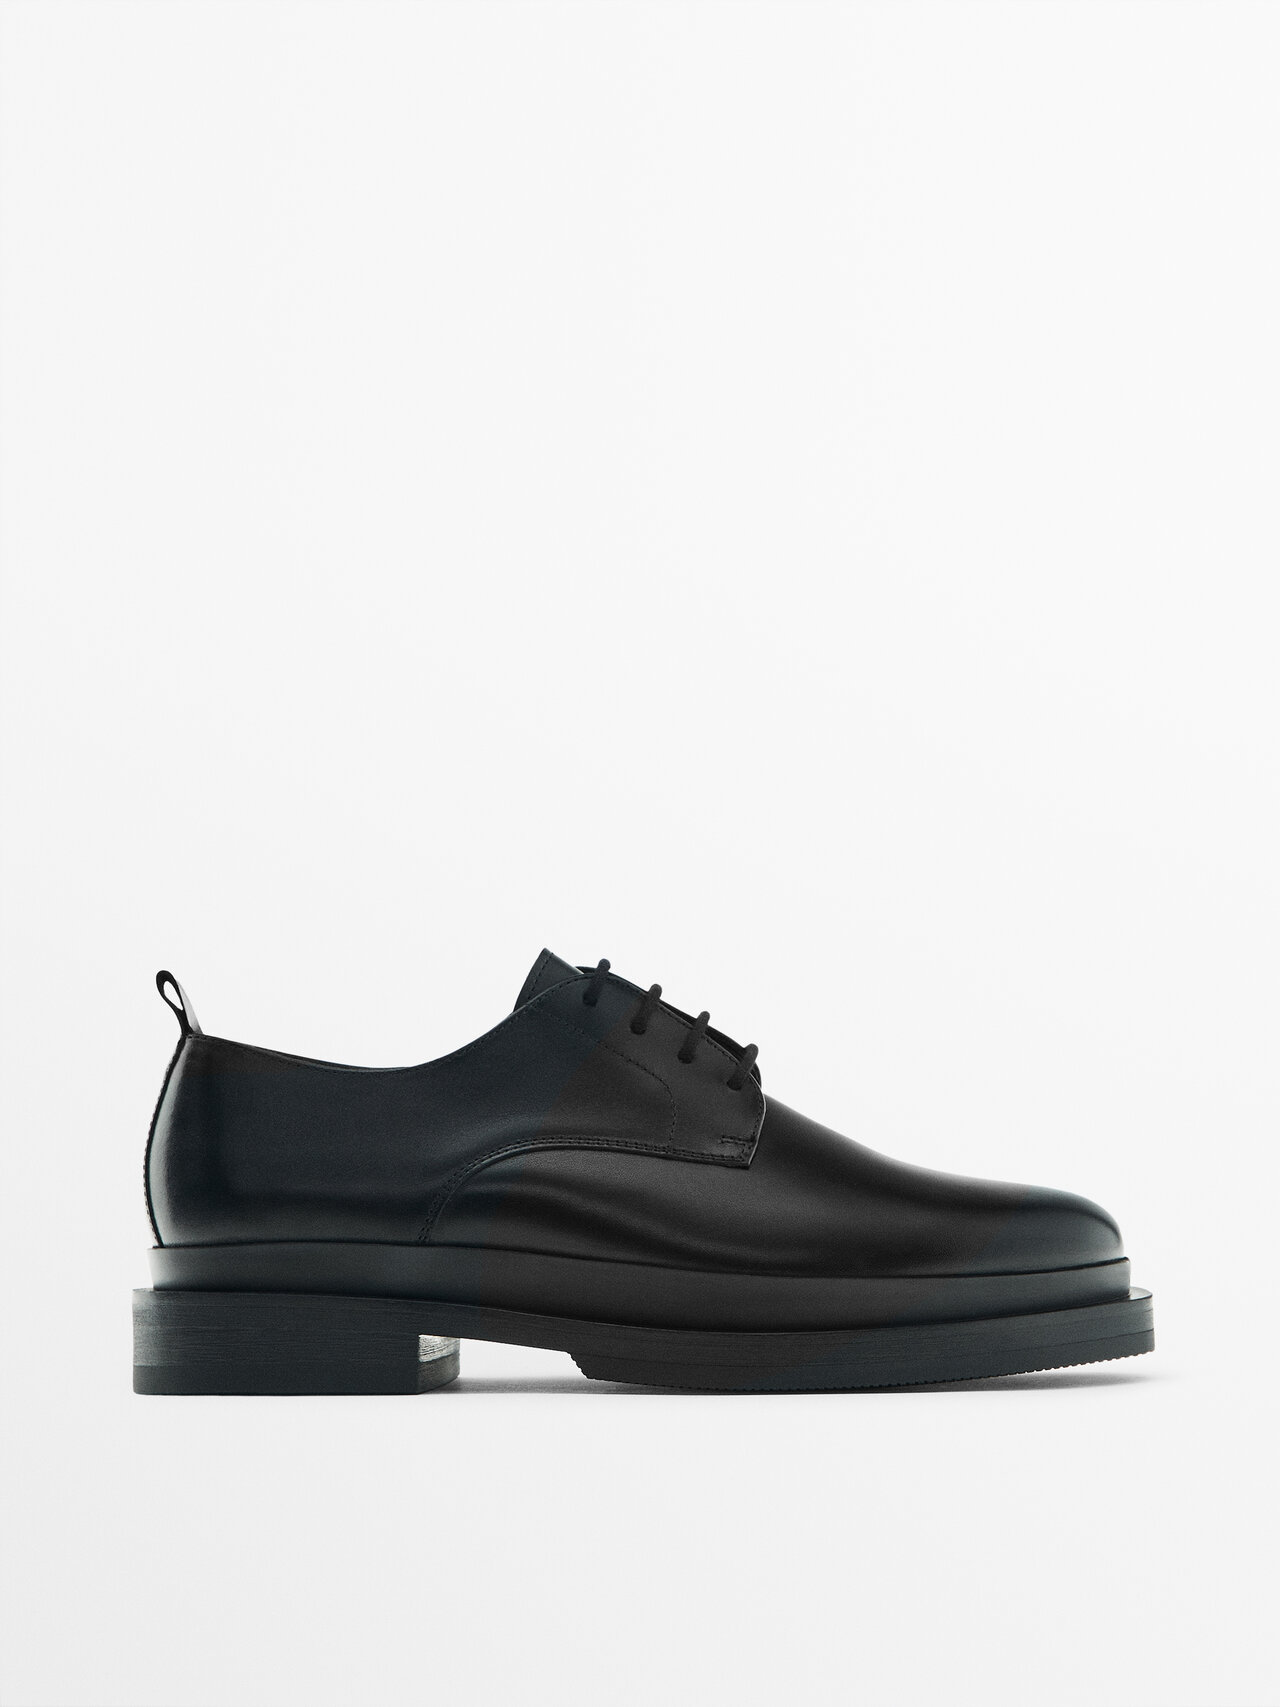 Massimo Dutti Brushed Nappa Leather Shoes - Studio In Black